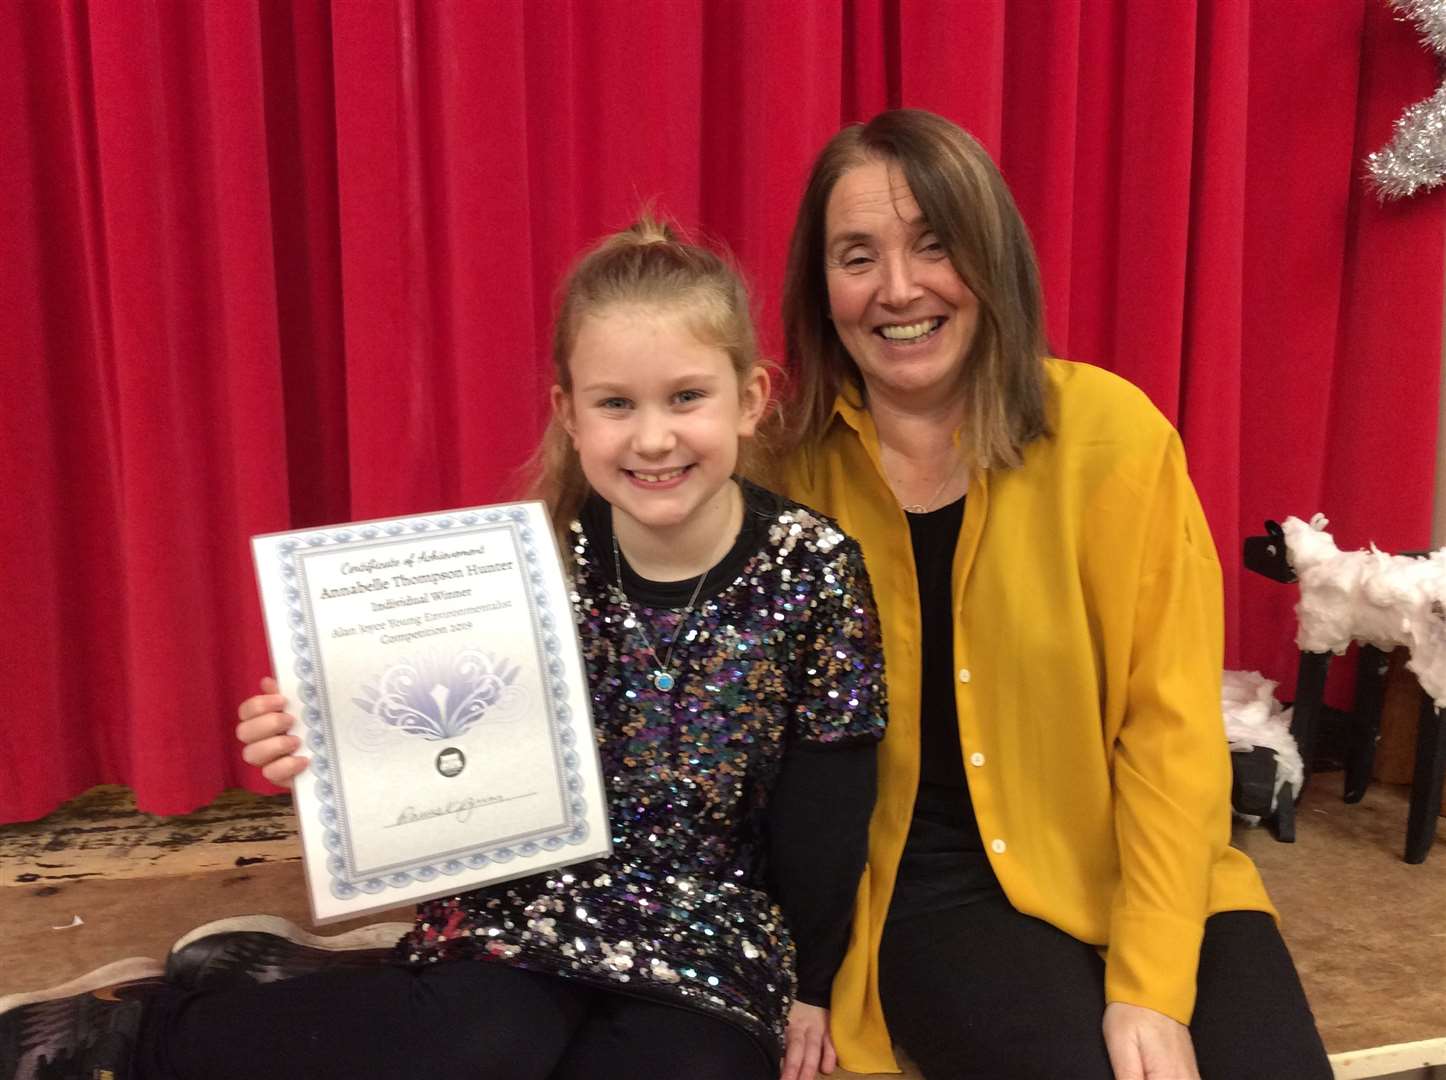 Annabelle Thompson Hunter, individual winner of the 1019 contest, was presented with her prize by Strathnaver Museum director Dorothy Pritchard.